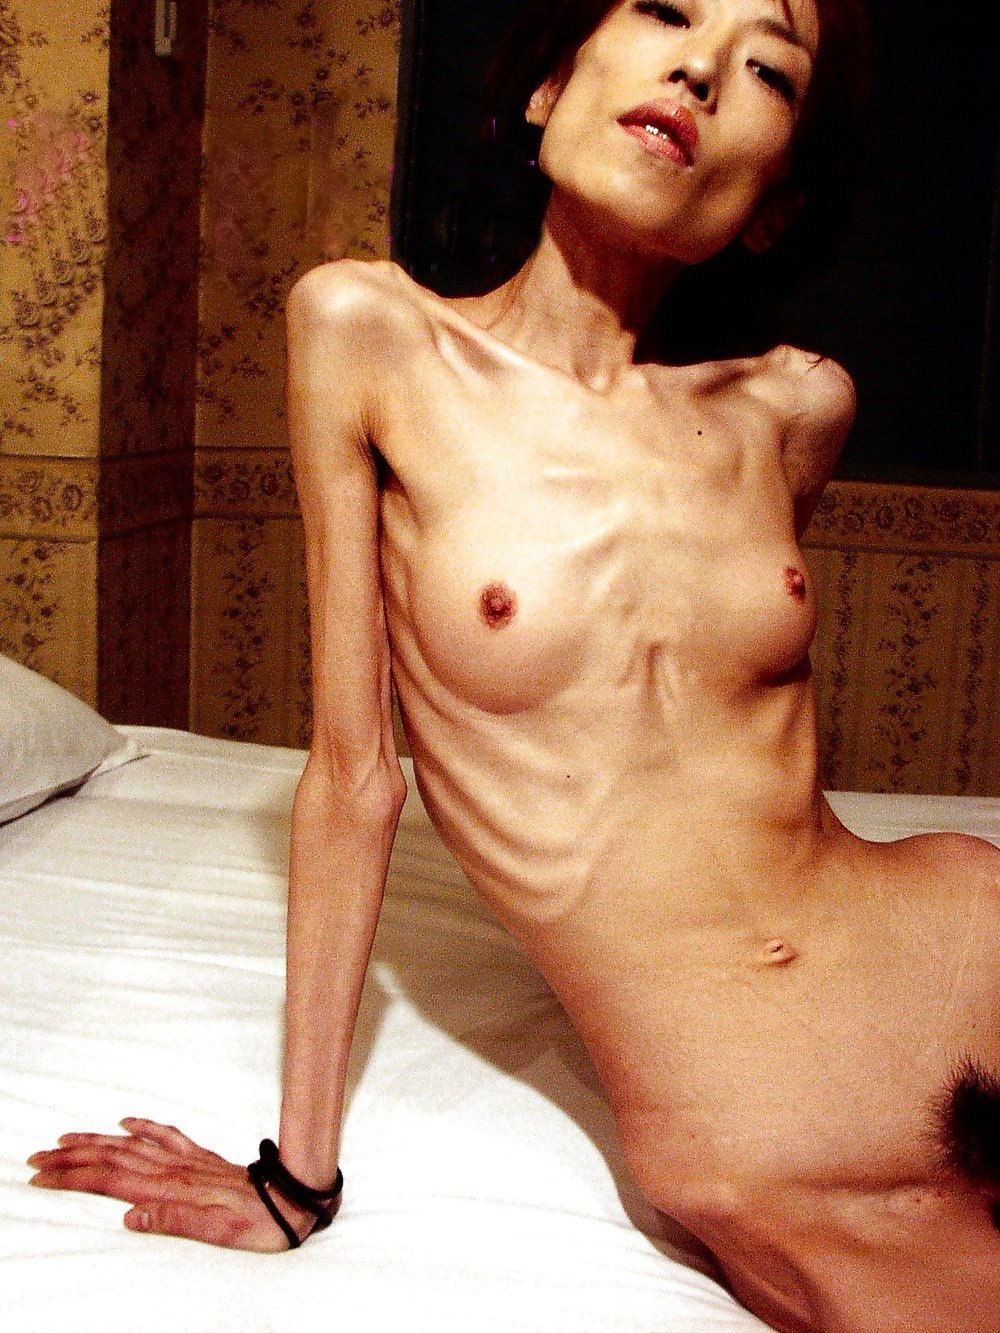 Teen Anorexic - Anorexic Nude - 57 photos